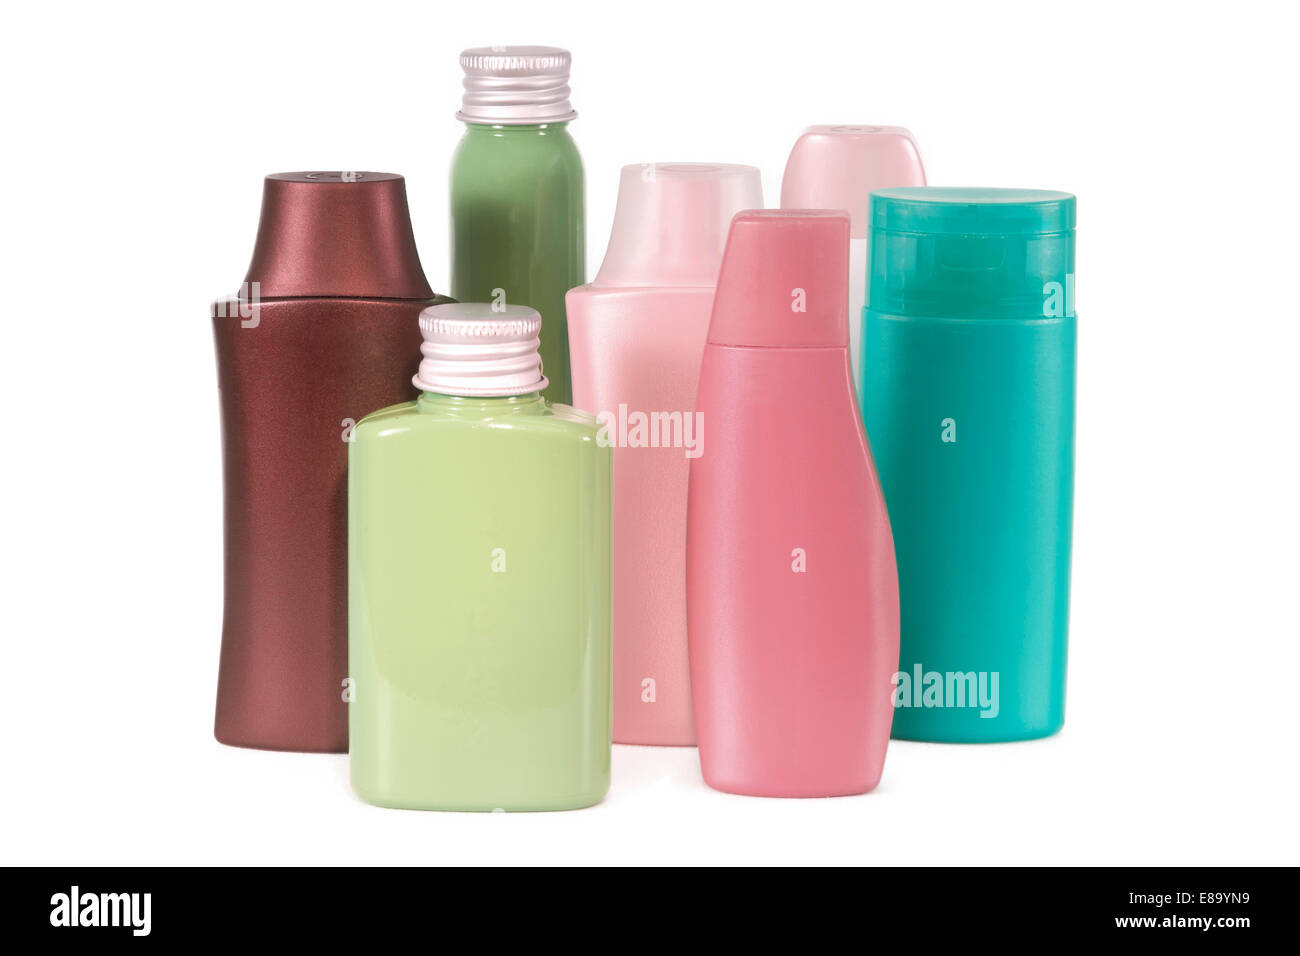 Plastic bottles, cosmetic products Stock Photo